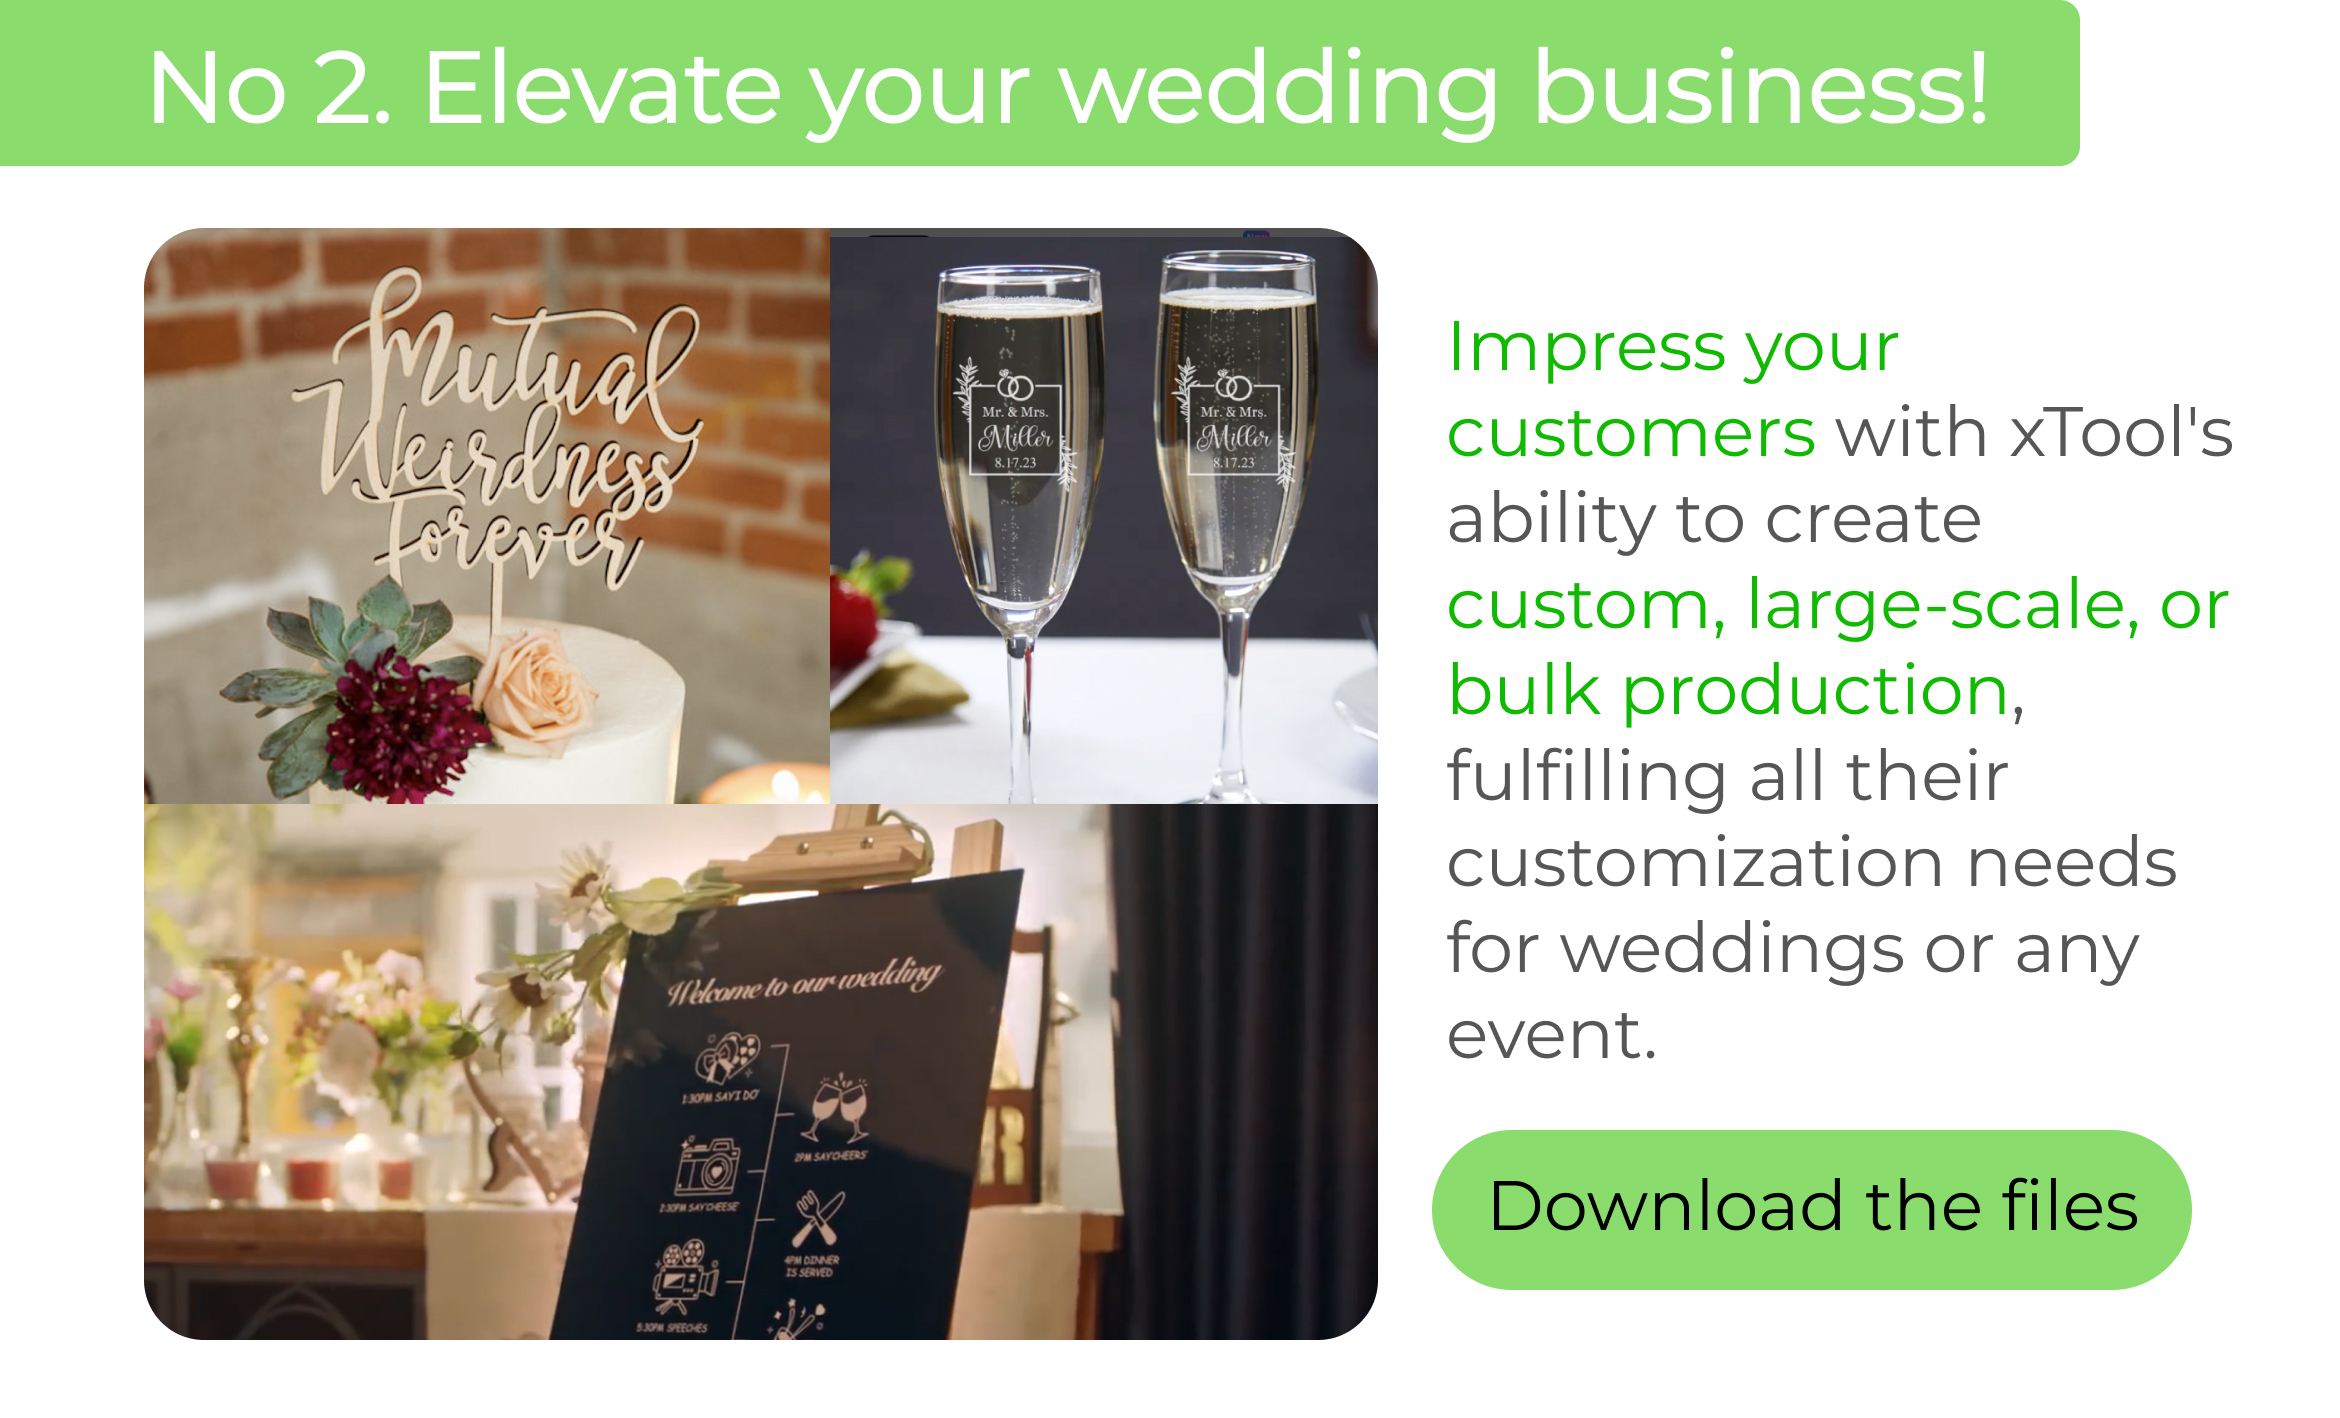 Elevate your wedding business!